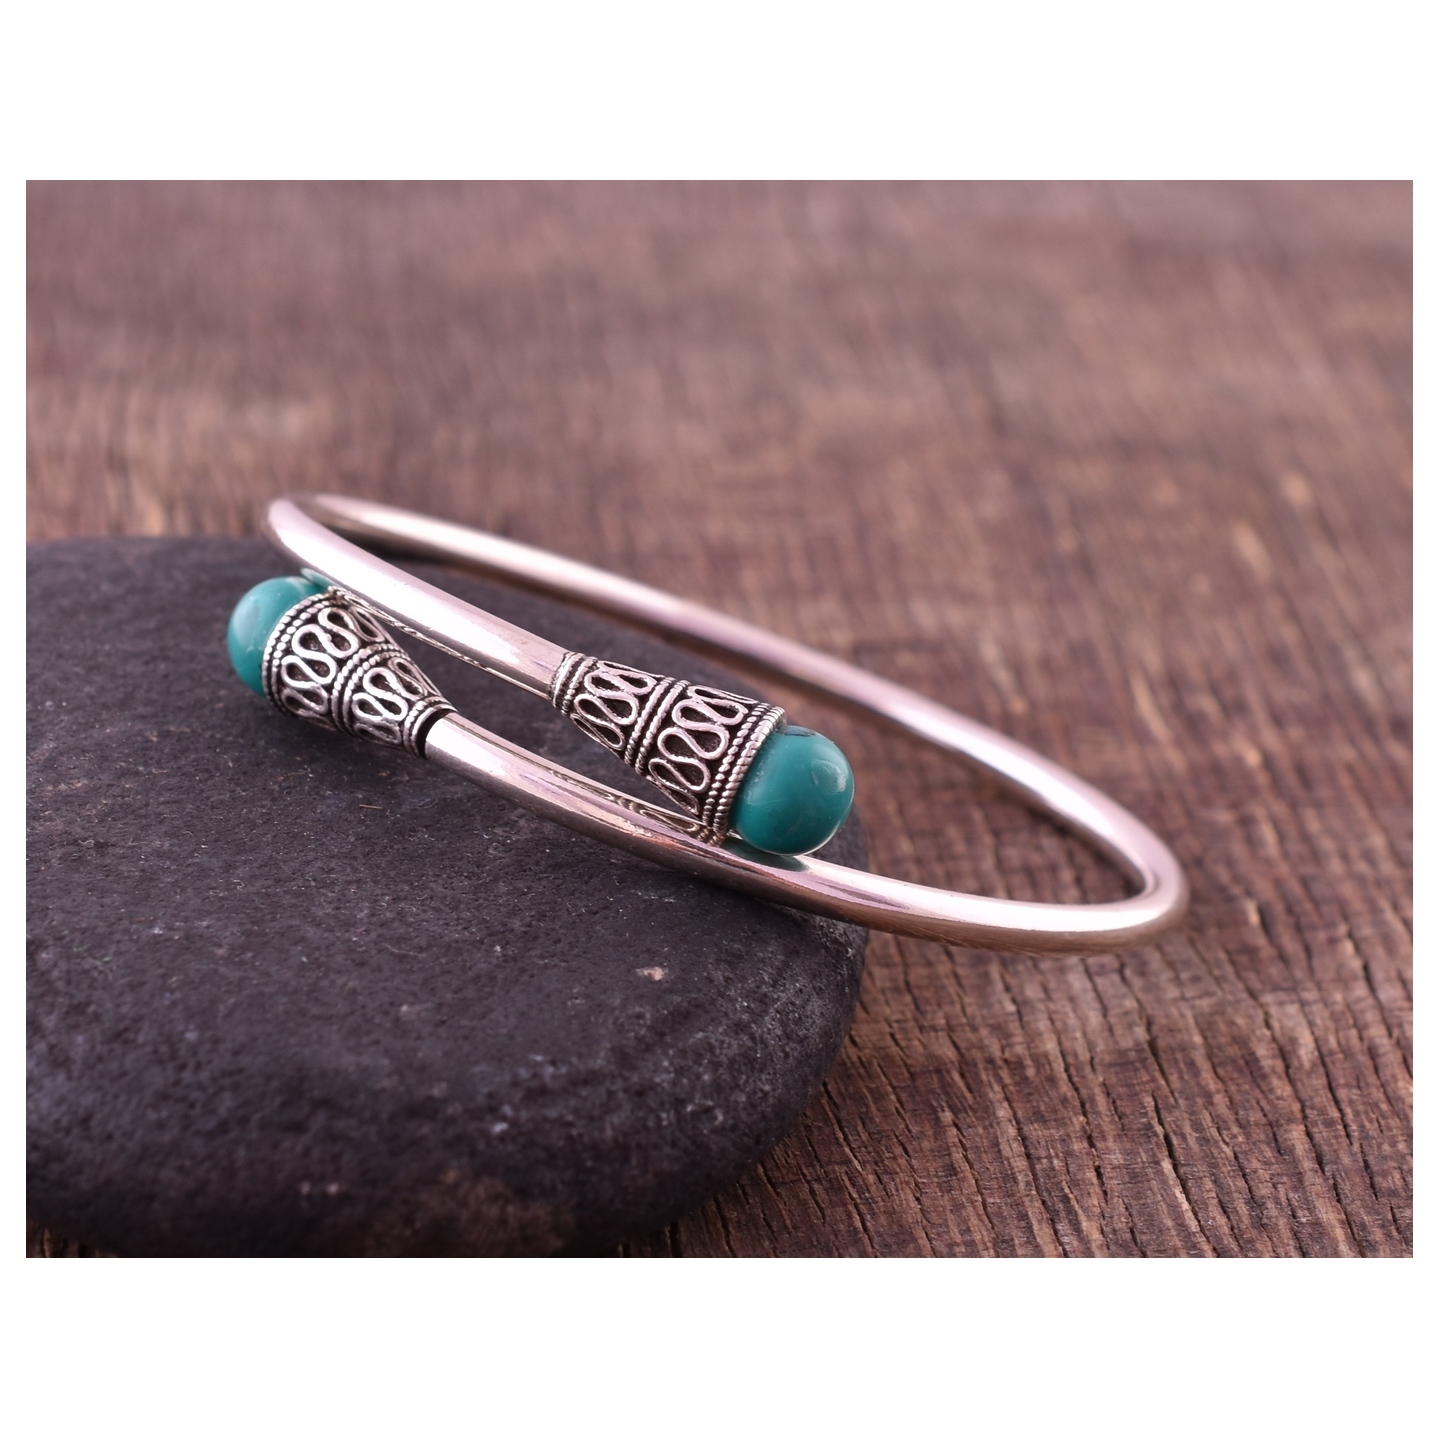 Beautiful Turquoise Bangle - Solid 925 Sterling Silver Oxidize Bangle